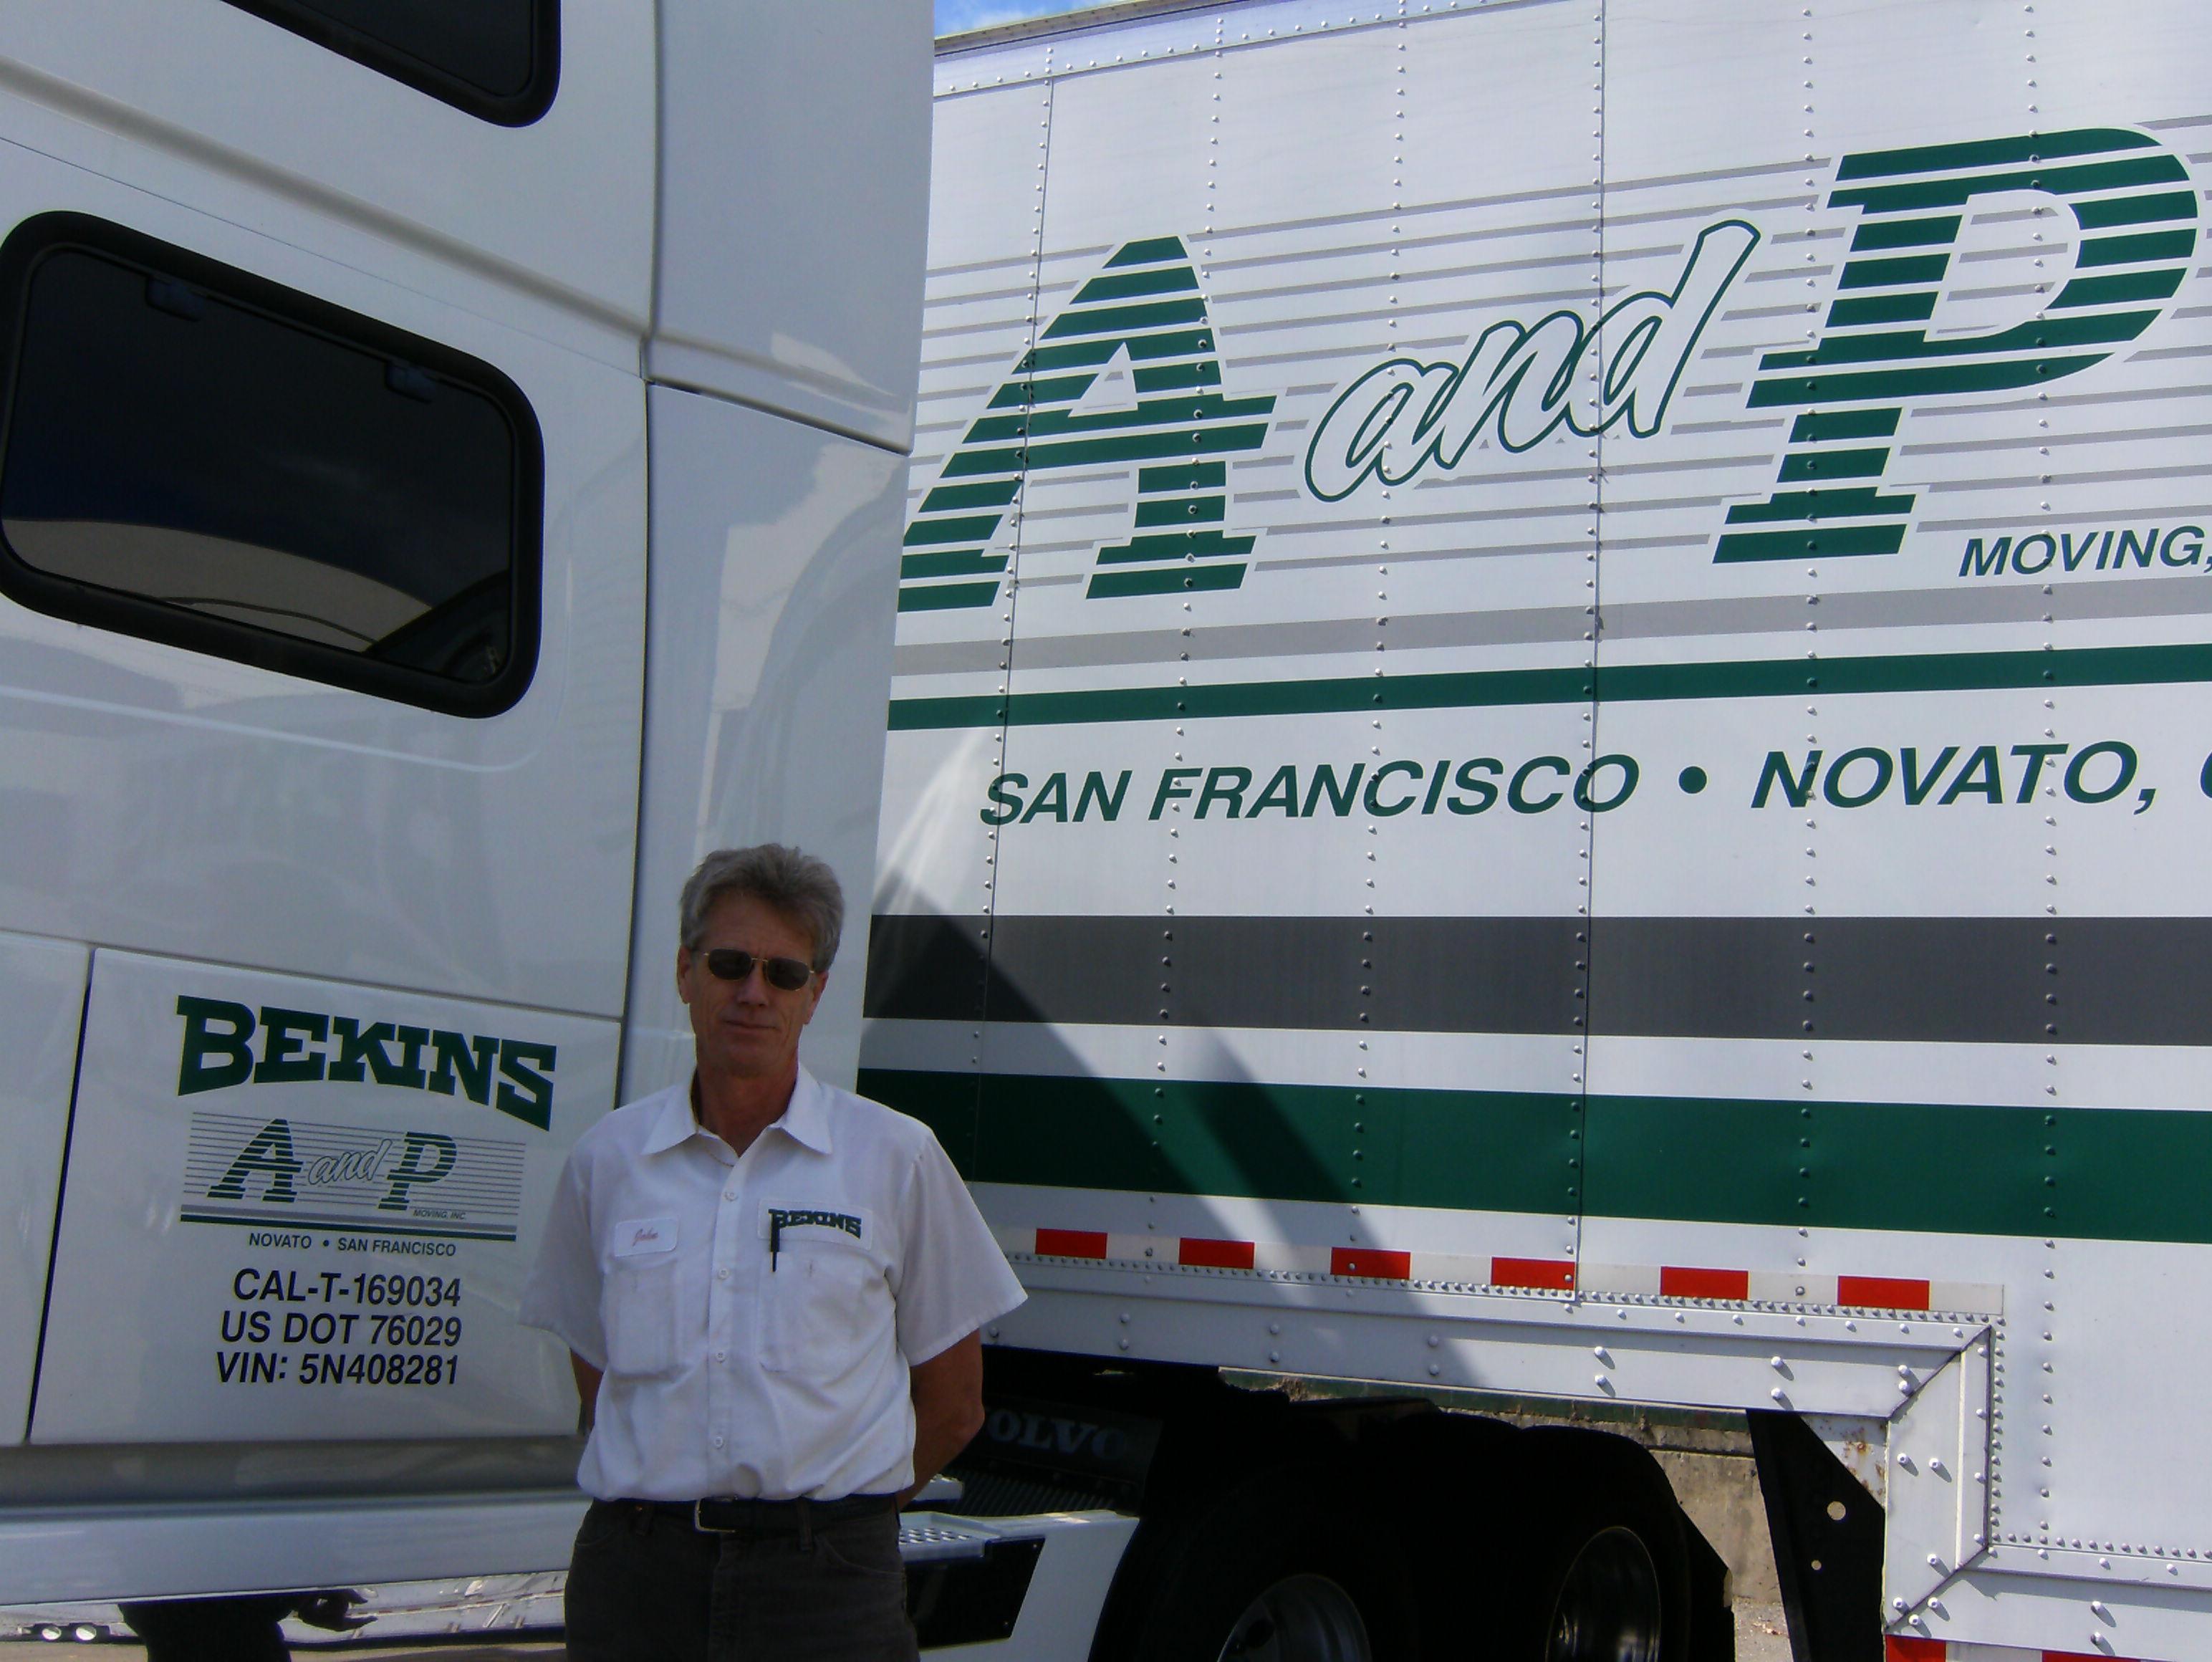 Picture of John Schroder is one of A and P Moving's interstate drivers. - A and P Moving, Inc.